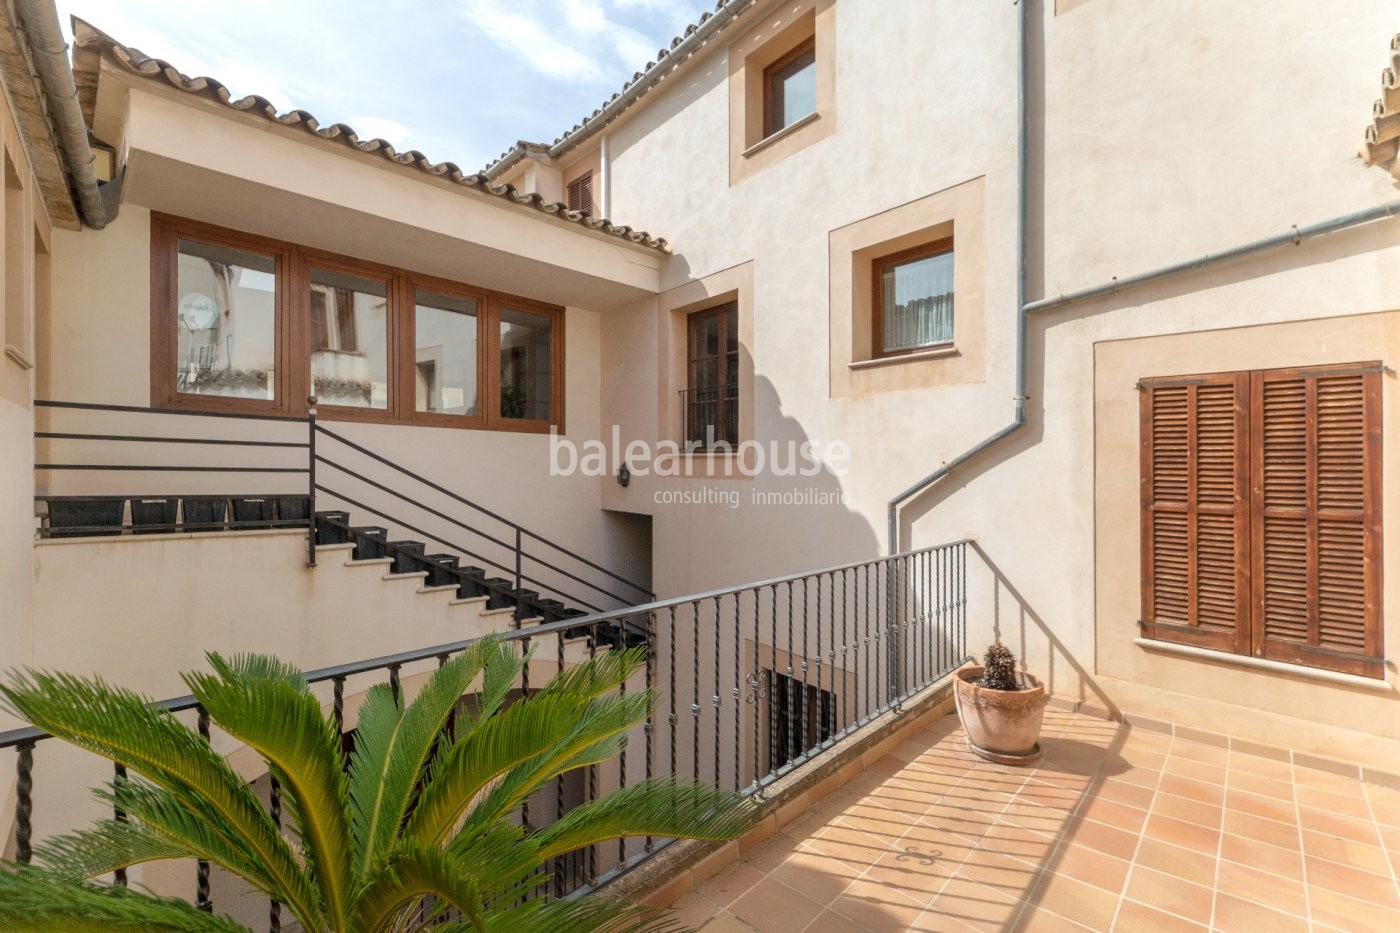 Excellent and luminous penthouse in a stately building in the beautiful old town of Palma.